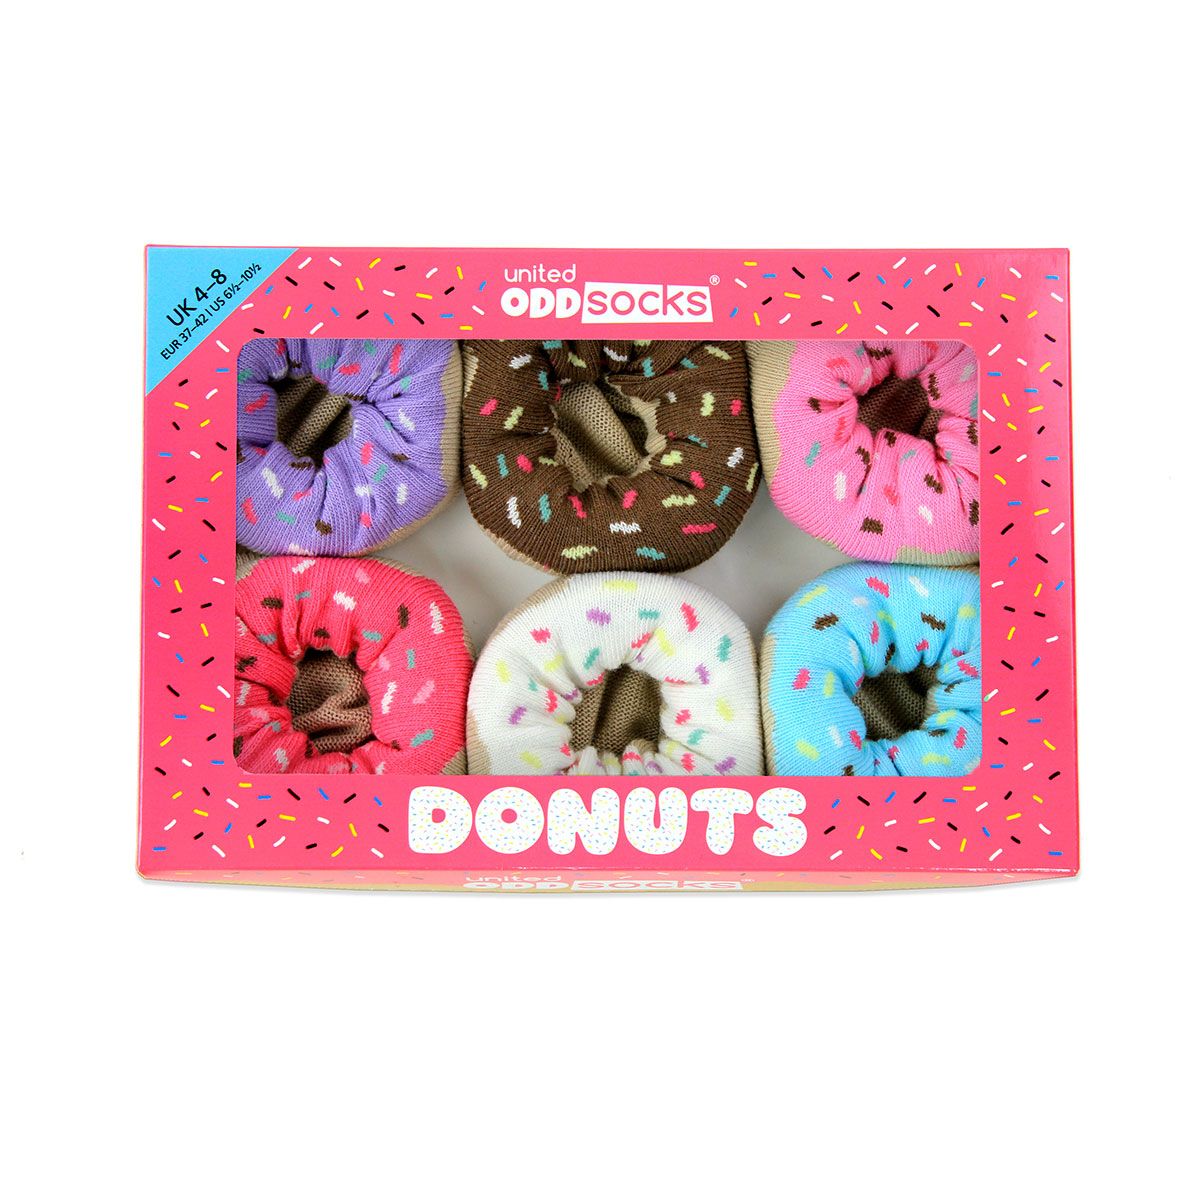 Coffret chaussettes Donuts United Oddsocks